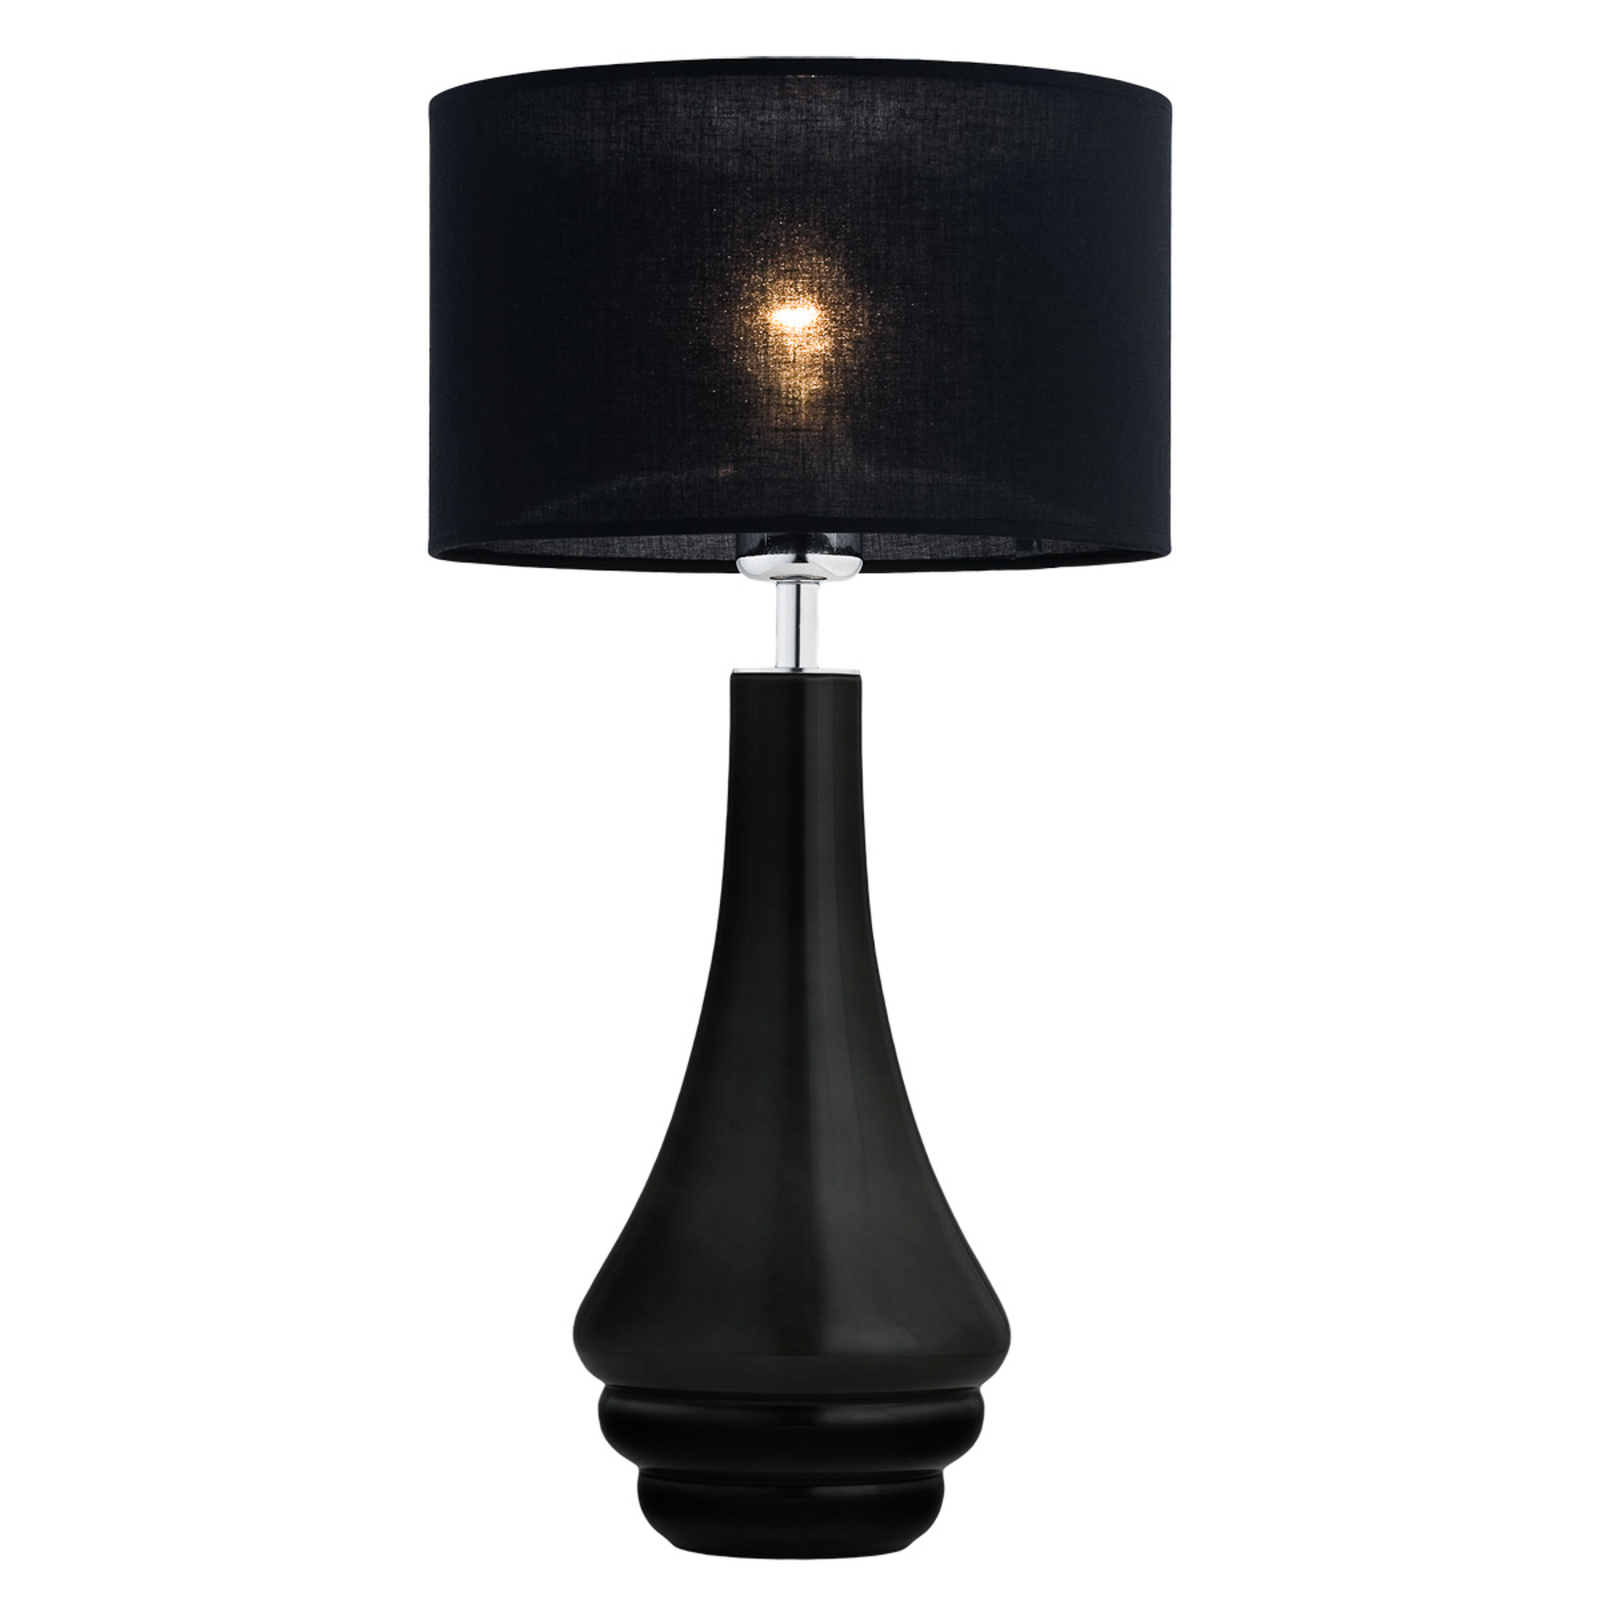 Arabesca table lamp all in black